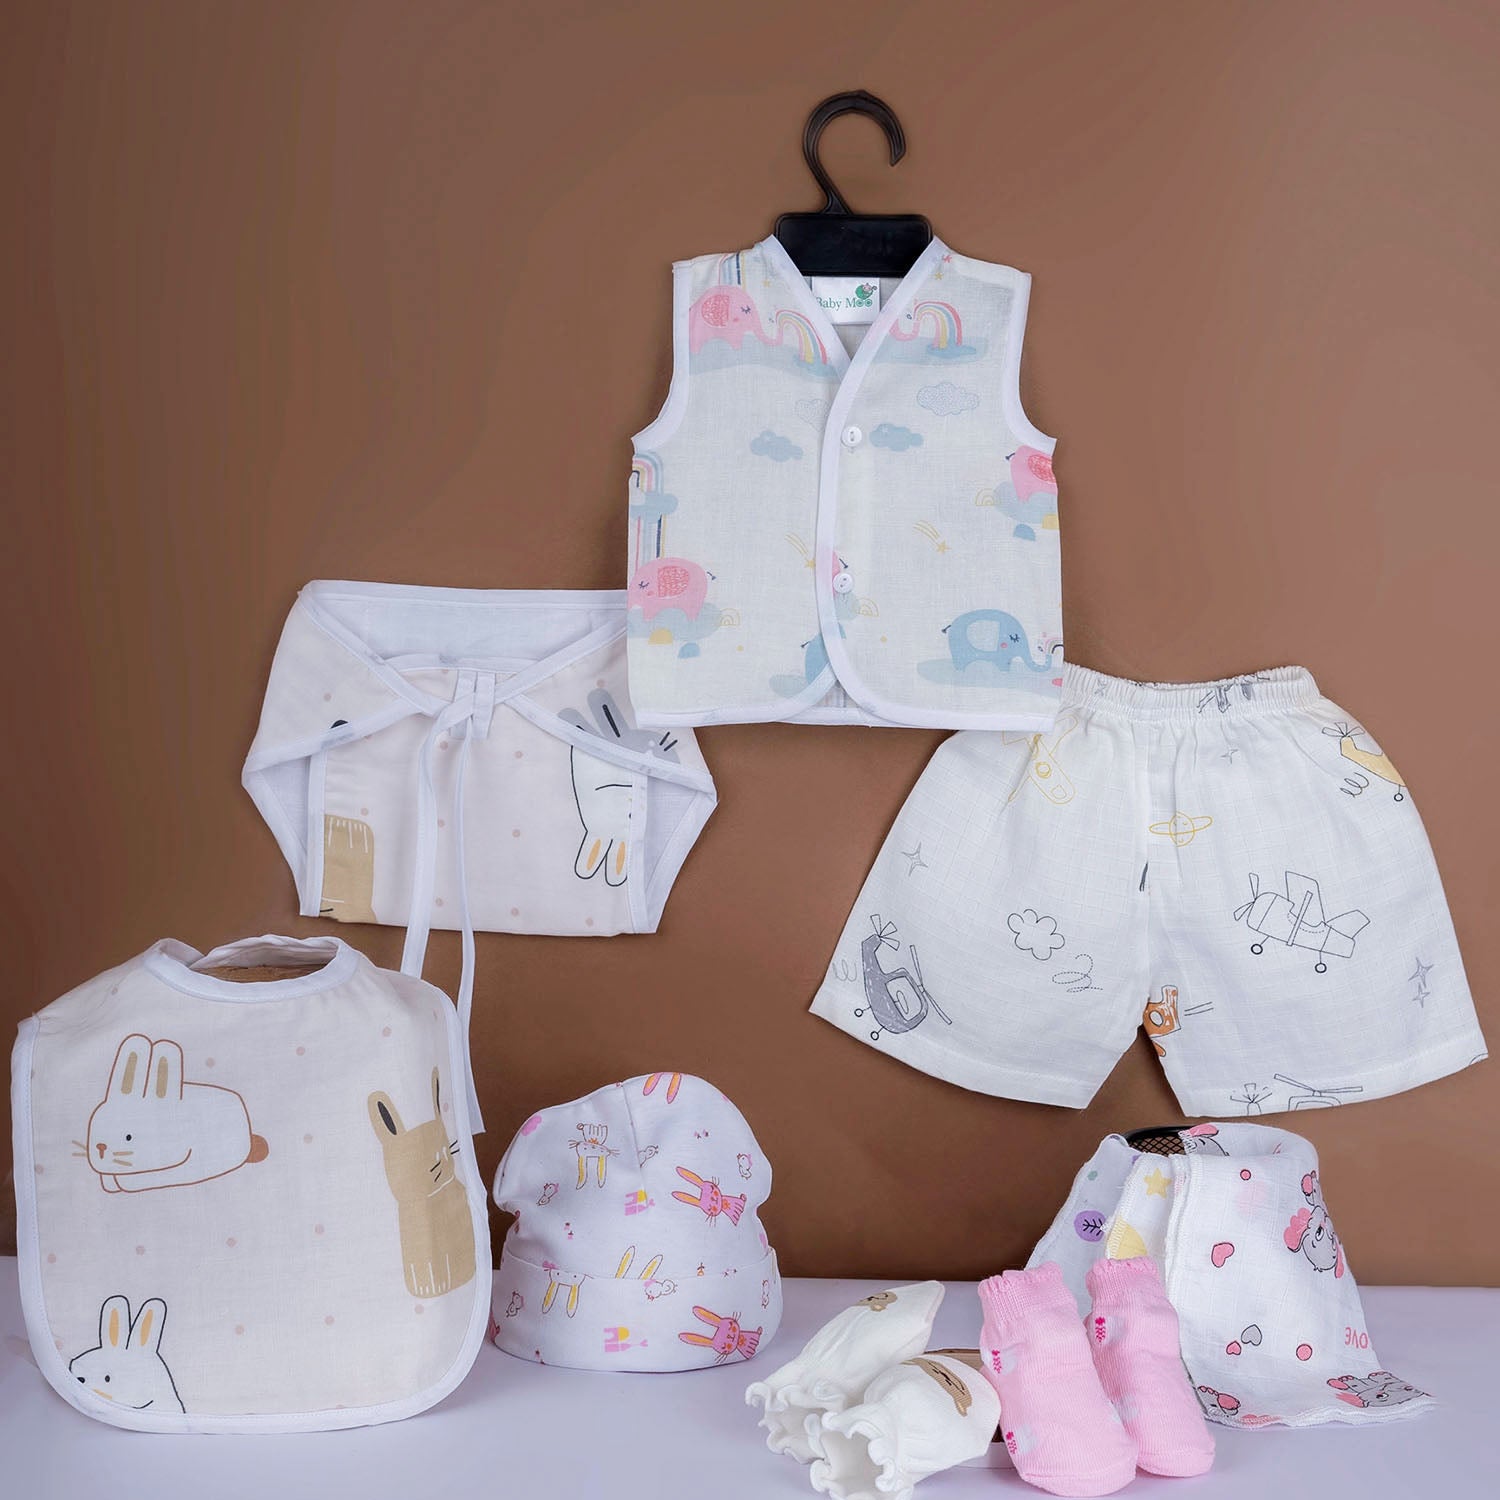 Baby Moo Adorable Animal Print Infant Essentials 10 Pcs Muslin Clothing Gift Set - Multicolour